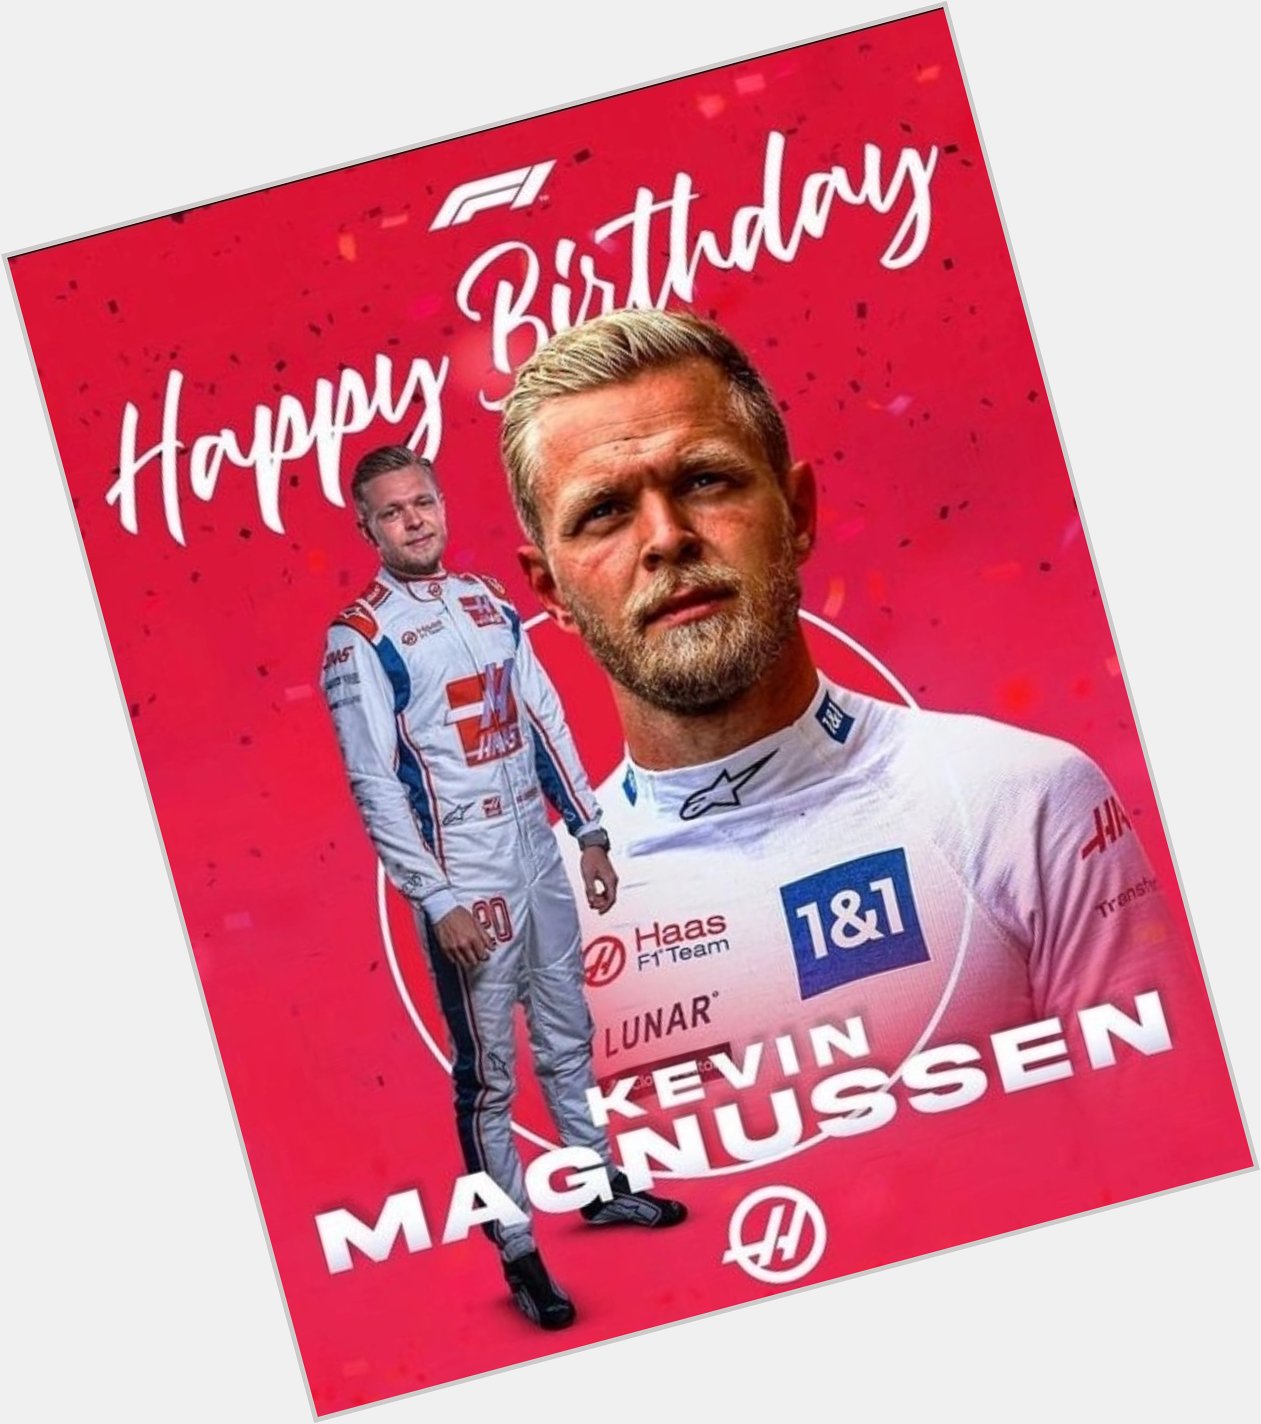 Happy birthday to the Haas driver, Kevin Magnussen Can anyone guess his age 